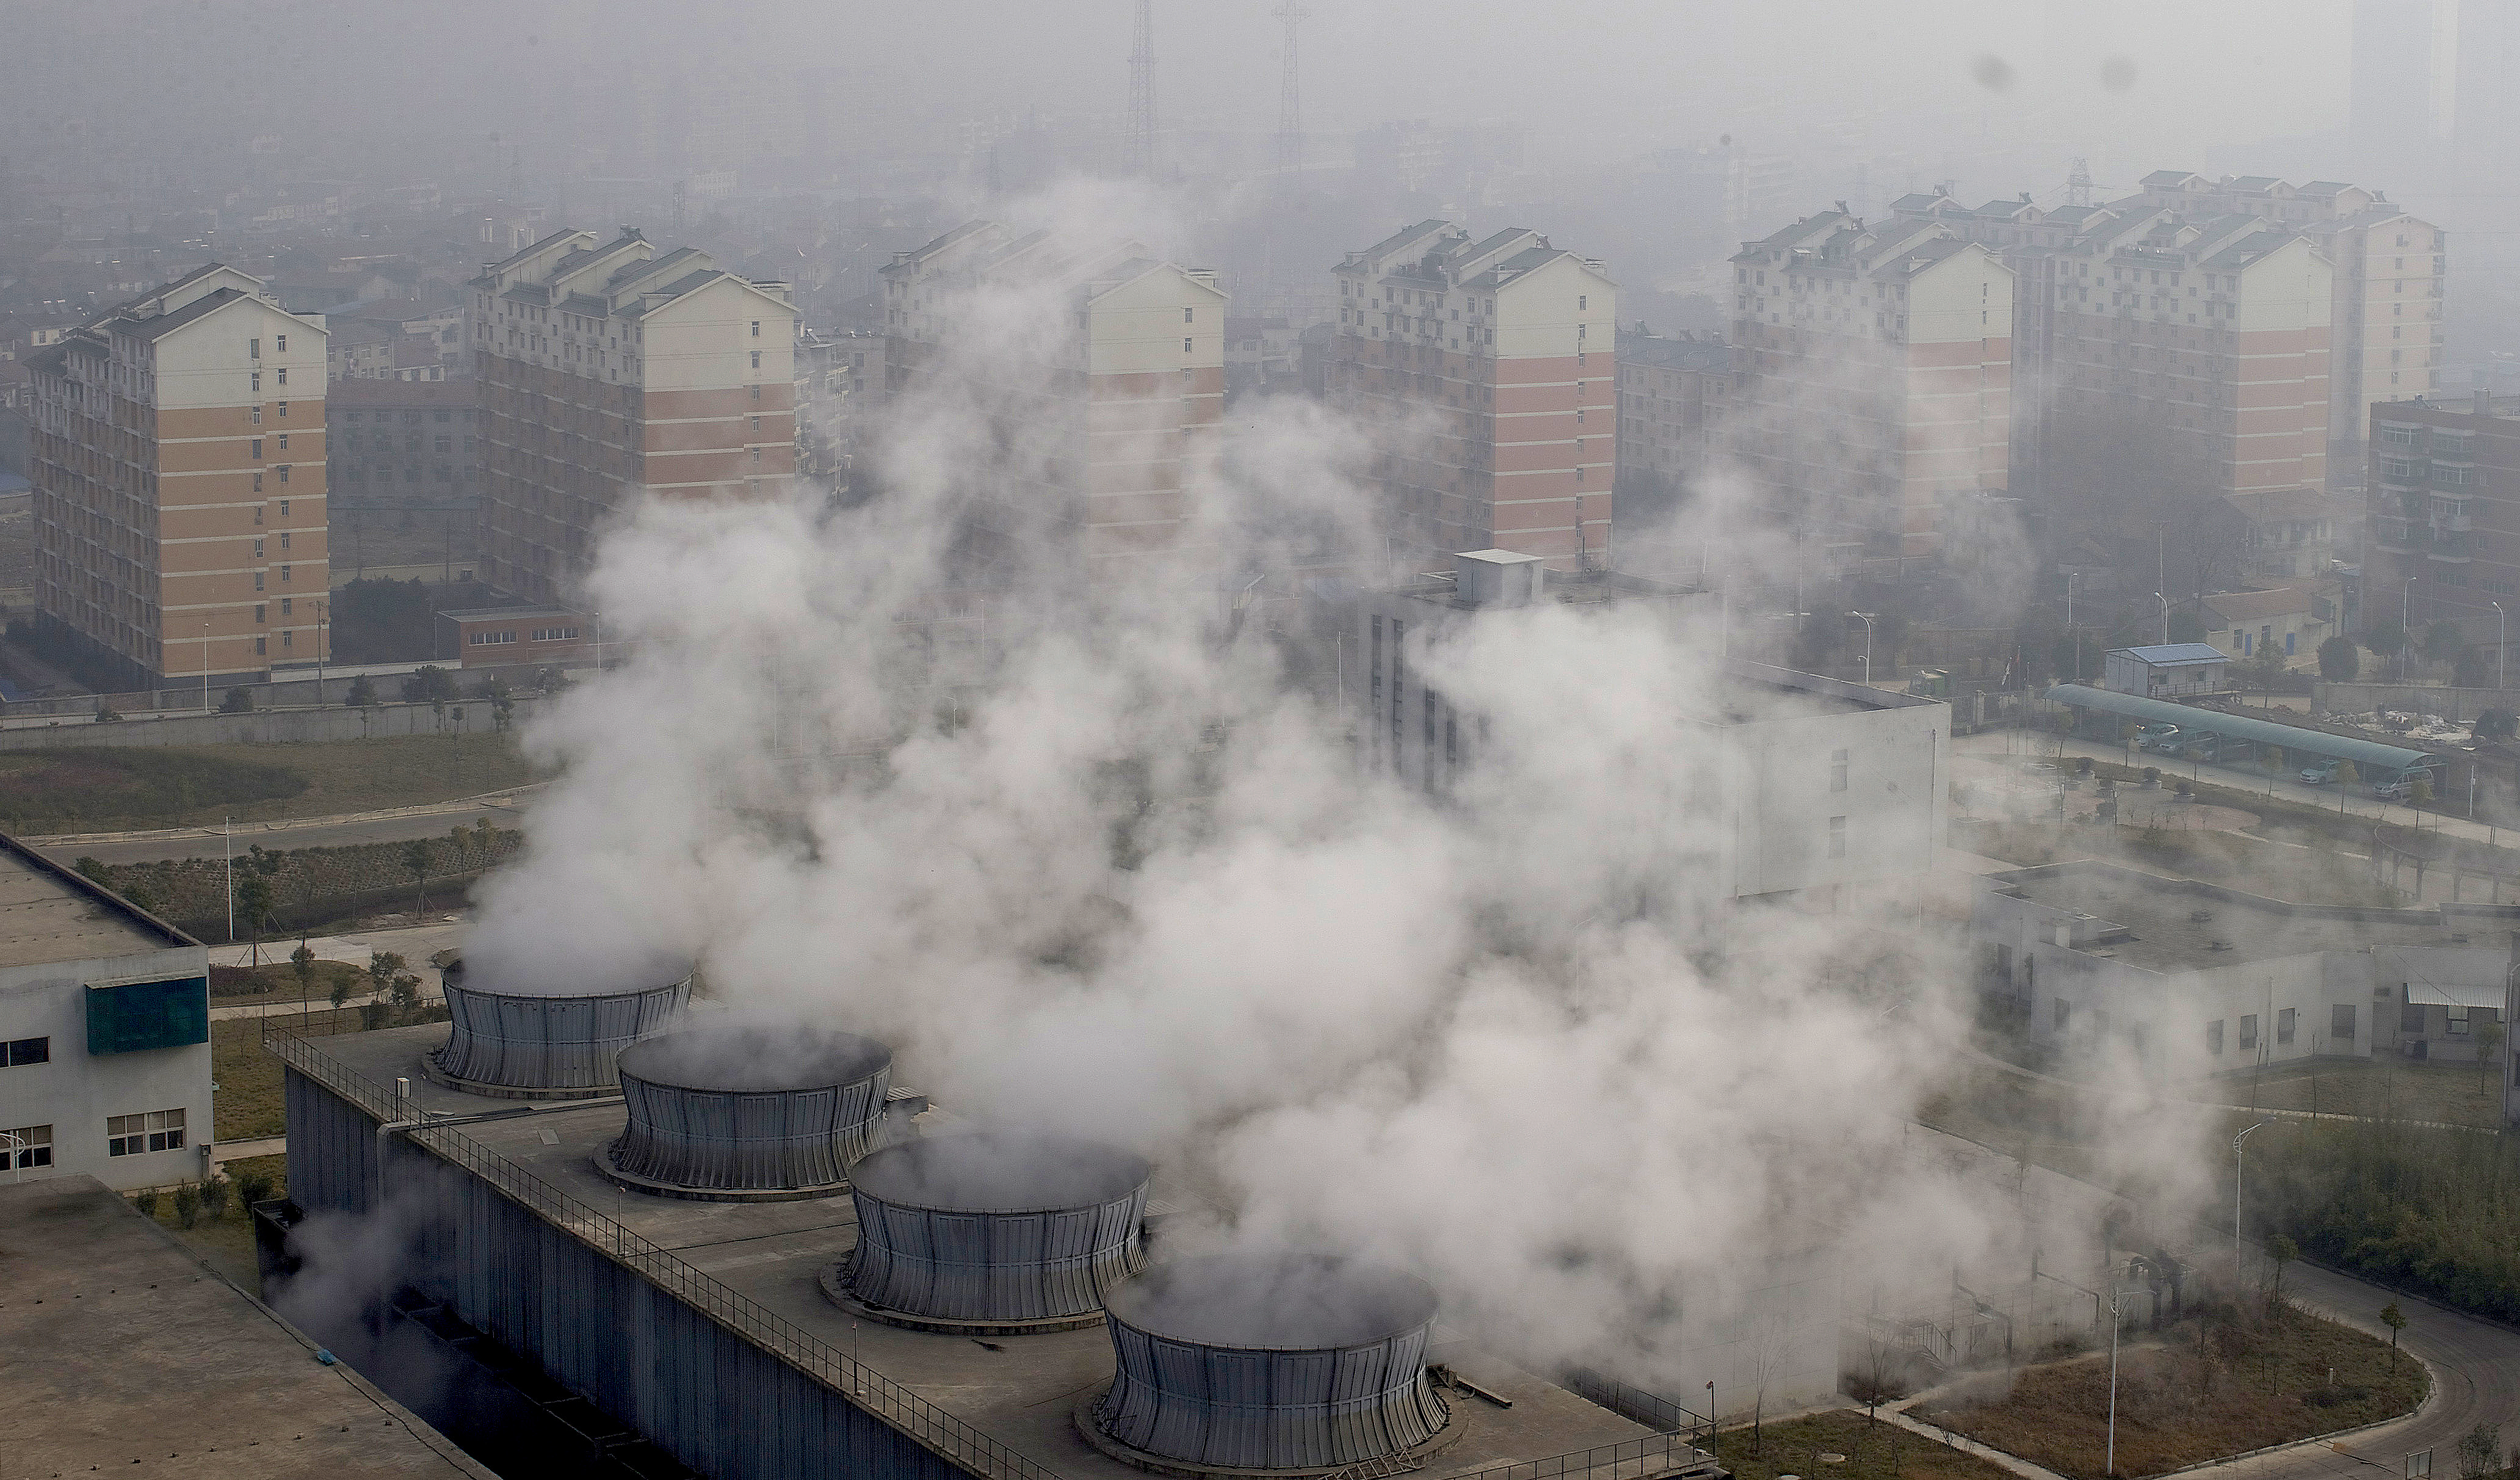 Smoke rises from a household waste incineration plant in Wuhan, Hubei province. Photo: ImagineChina